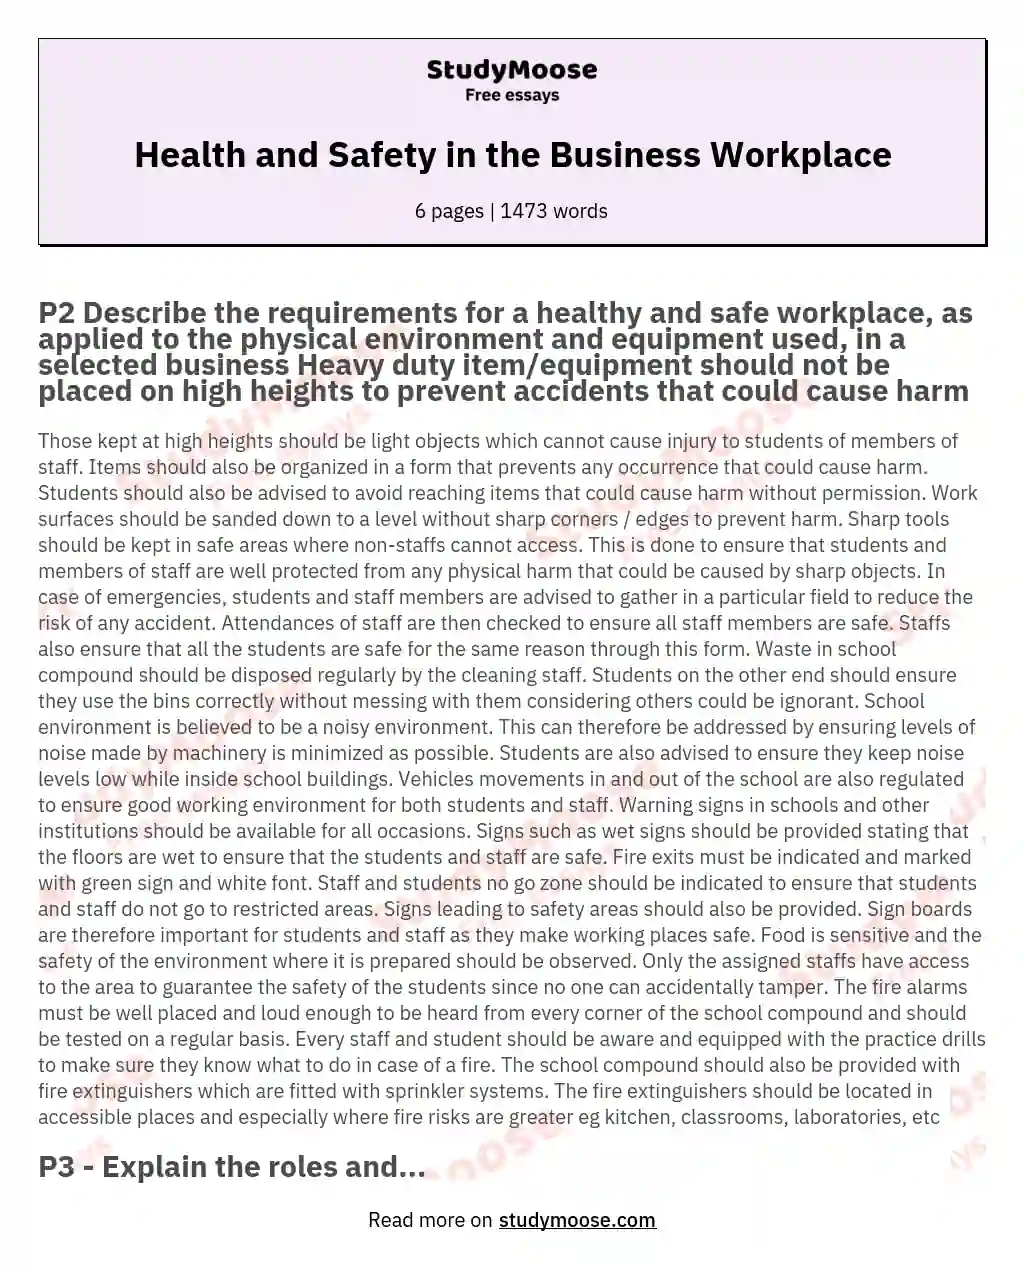 how will you ensure safety in the workplace essay